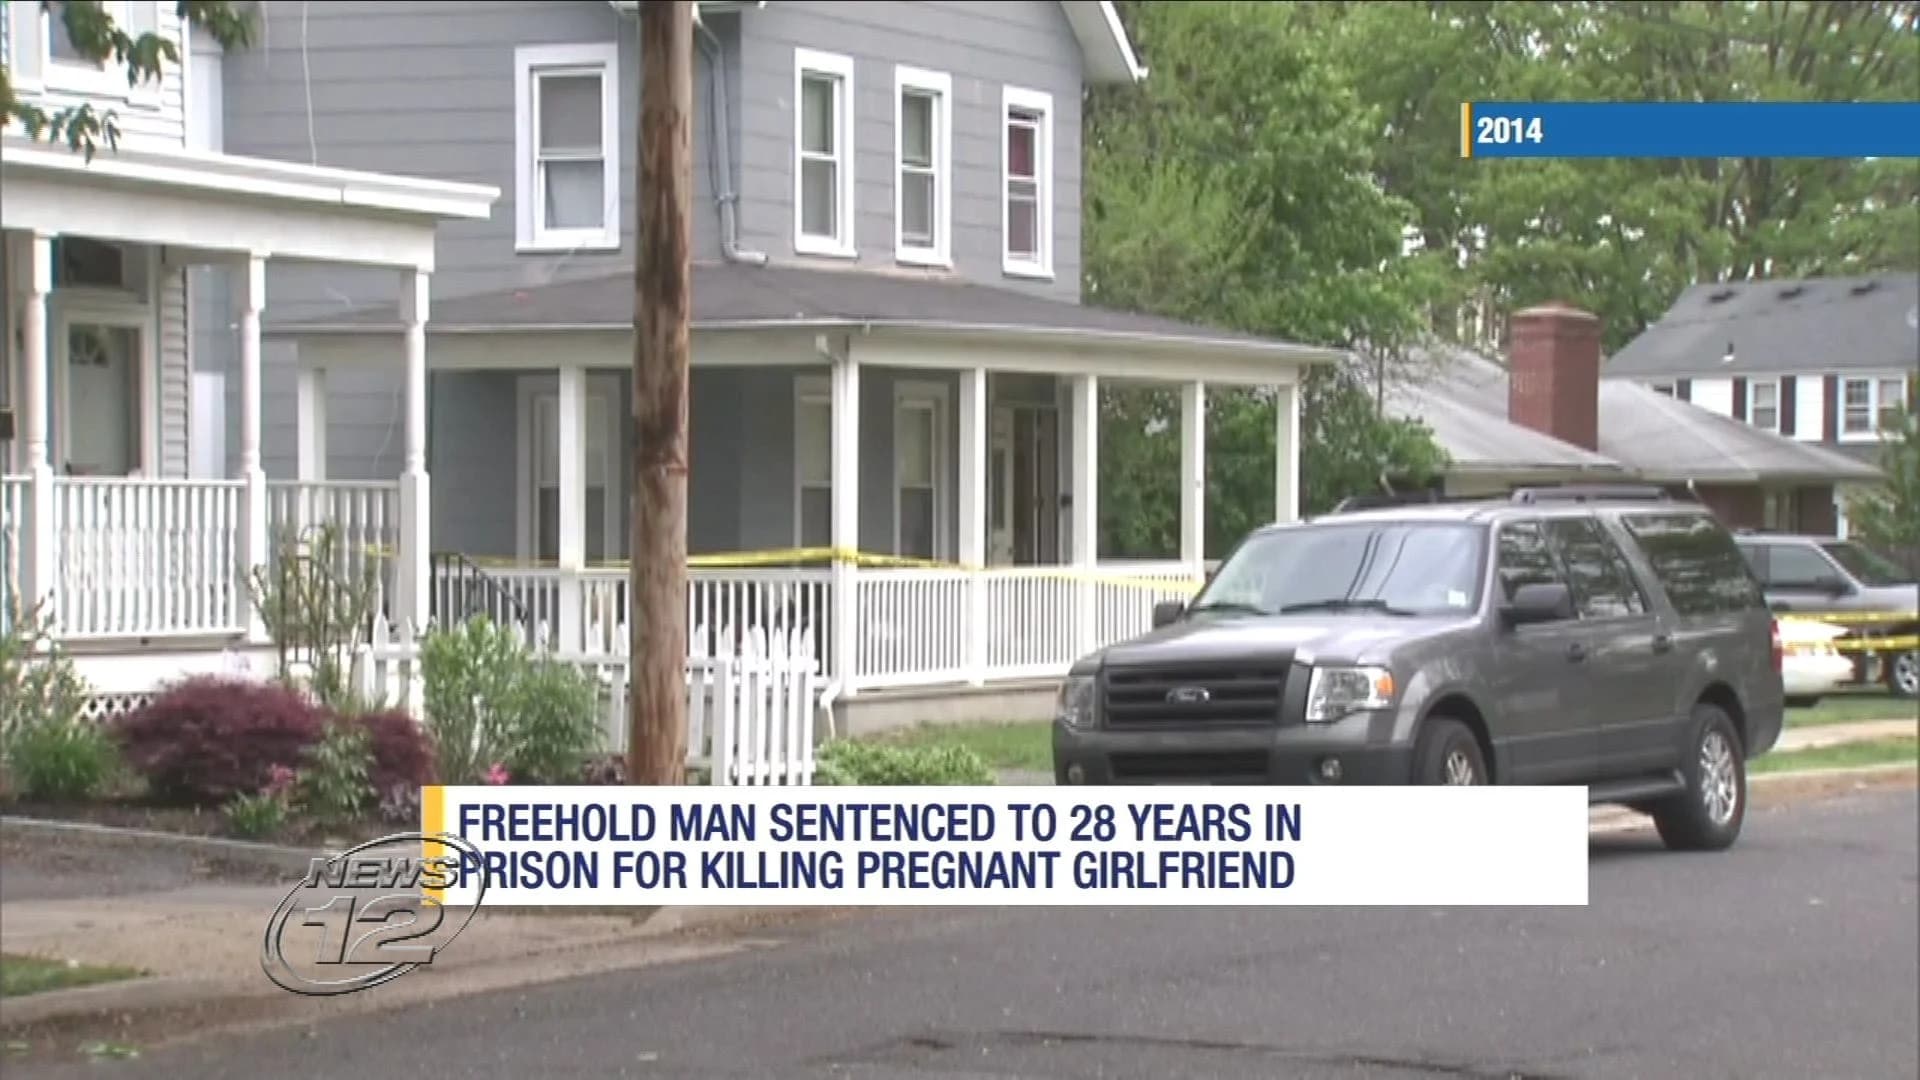 Freehold man sentenced to 28 years in prison for killing pregnant girlfriend